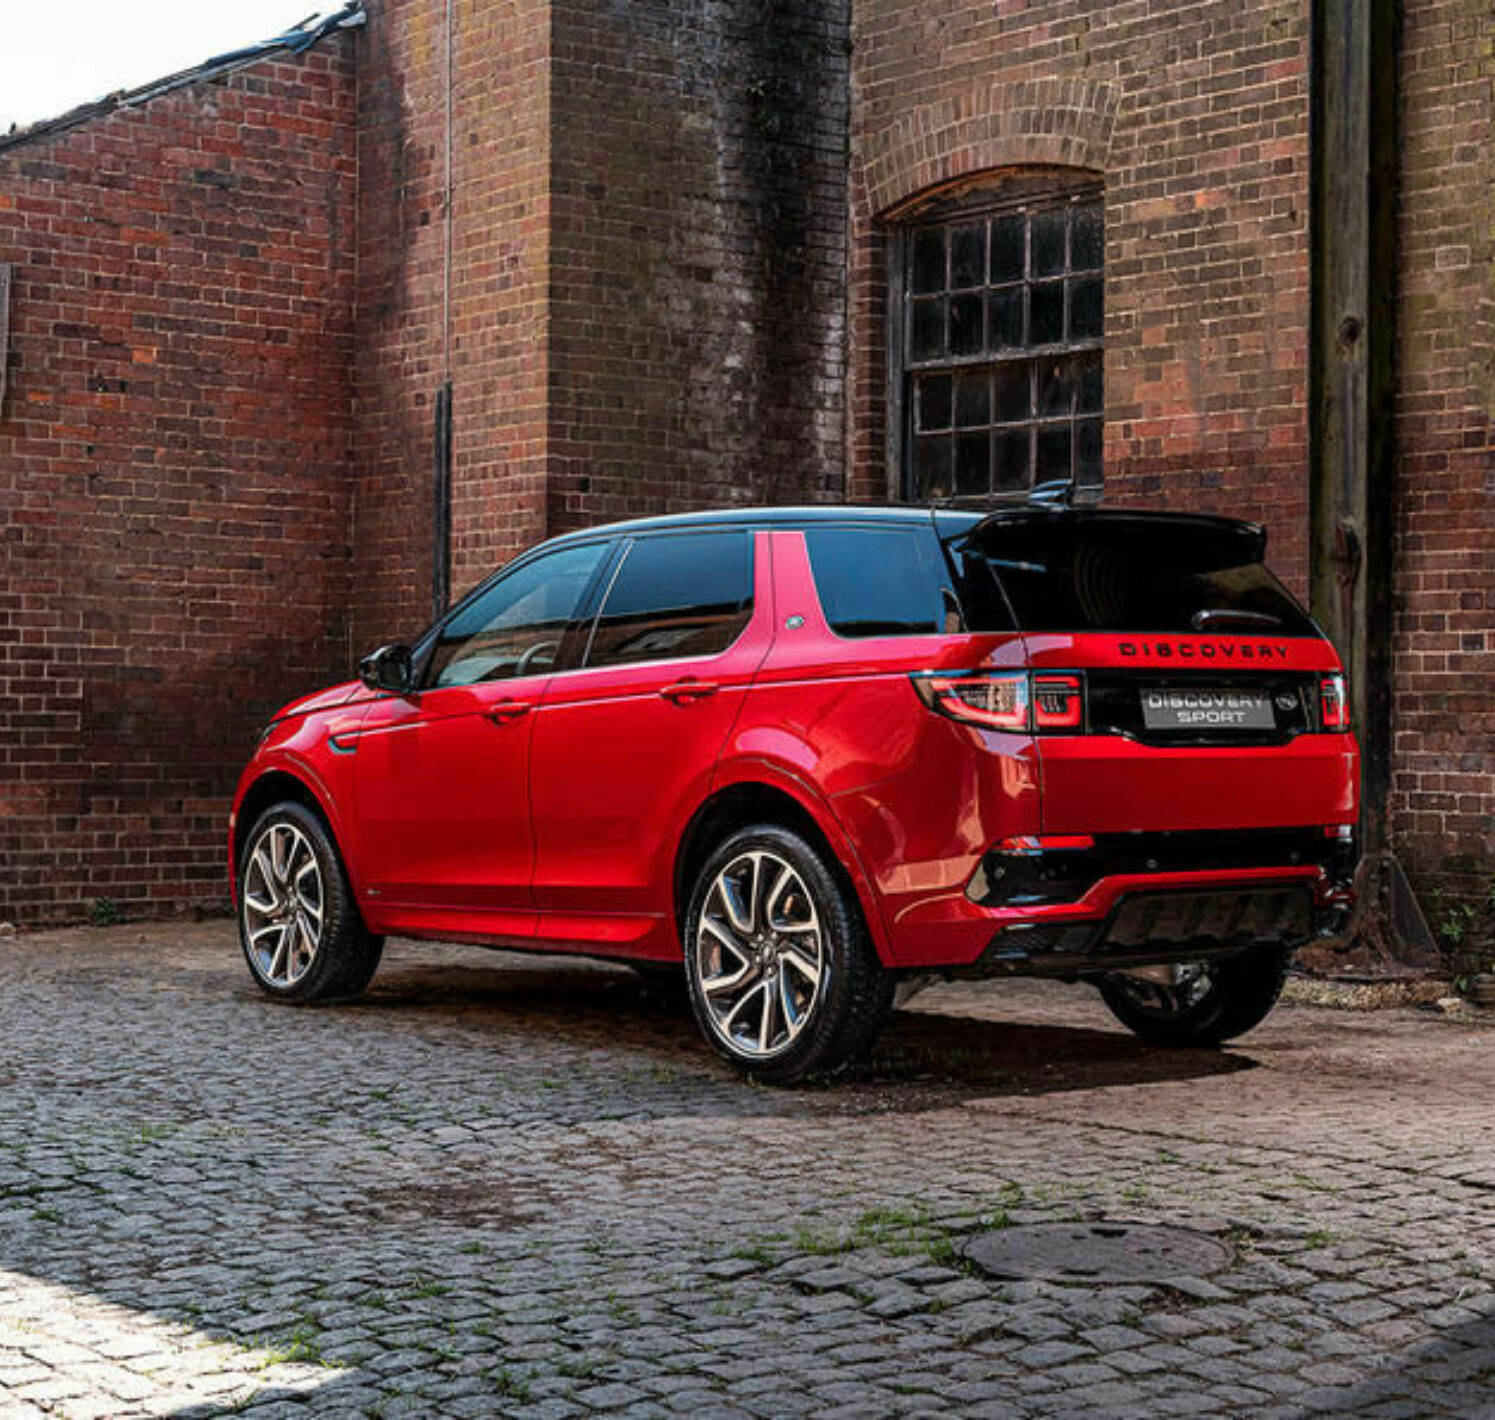 https://autofilter.sk/assets/images/discovery-sport/gallery/lr-discovery-sport-2019-4292b_01-galeria.jpg - obrazok